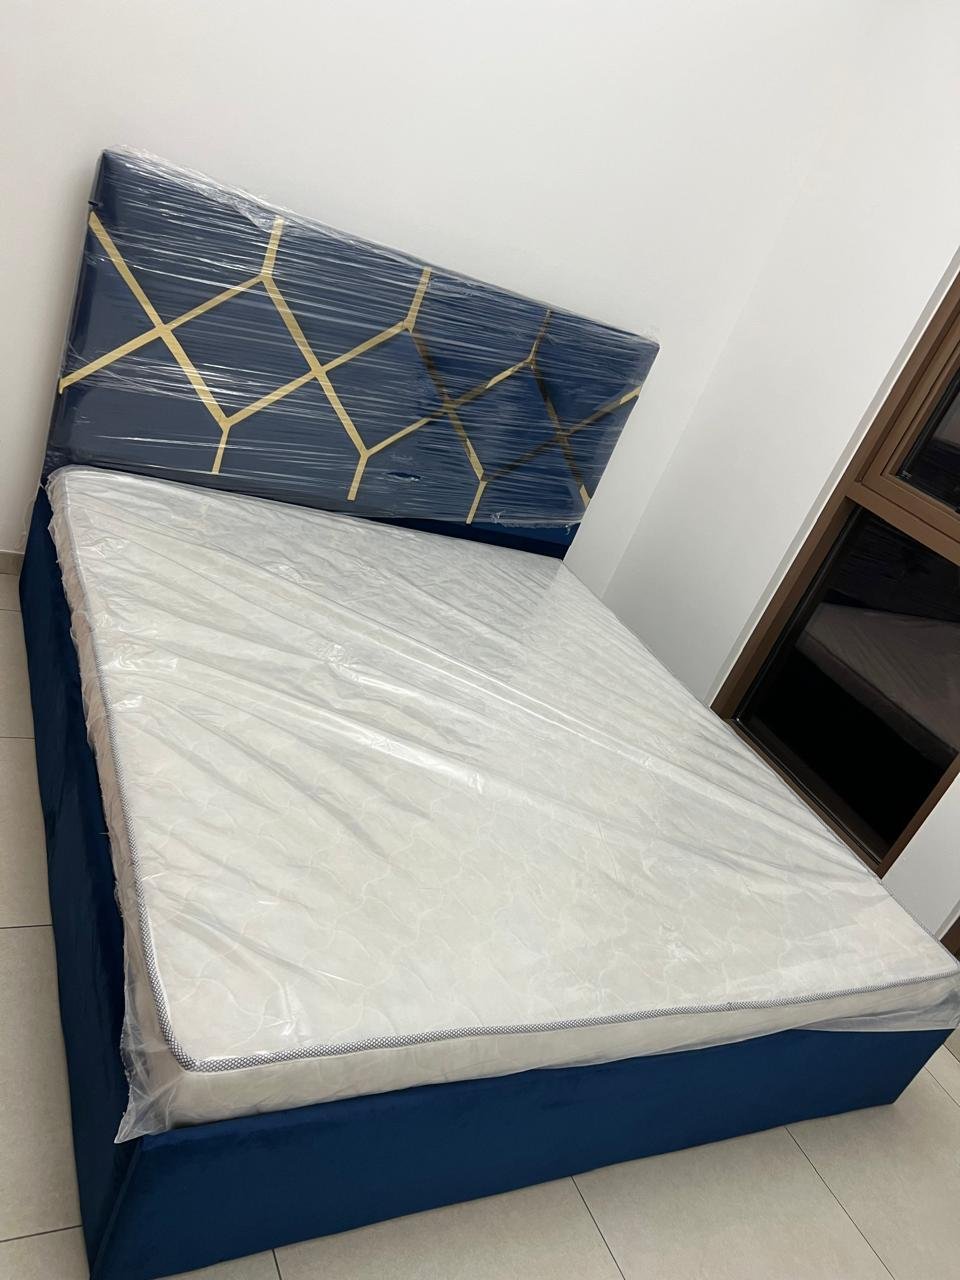 Bed For Sale In Fujairah With Mattress